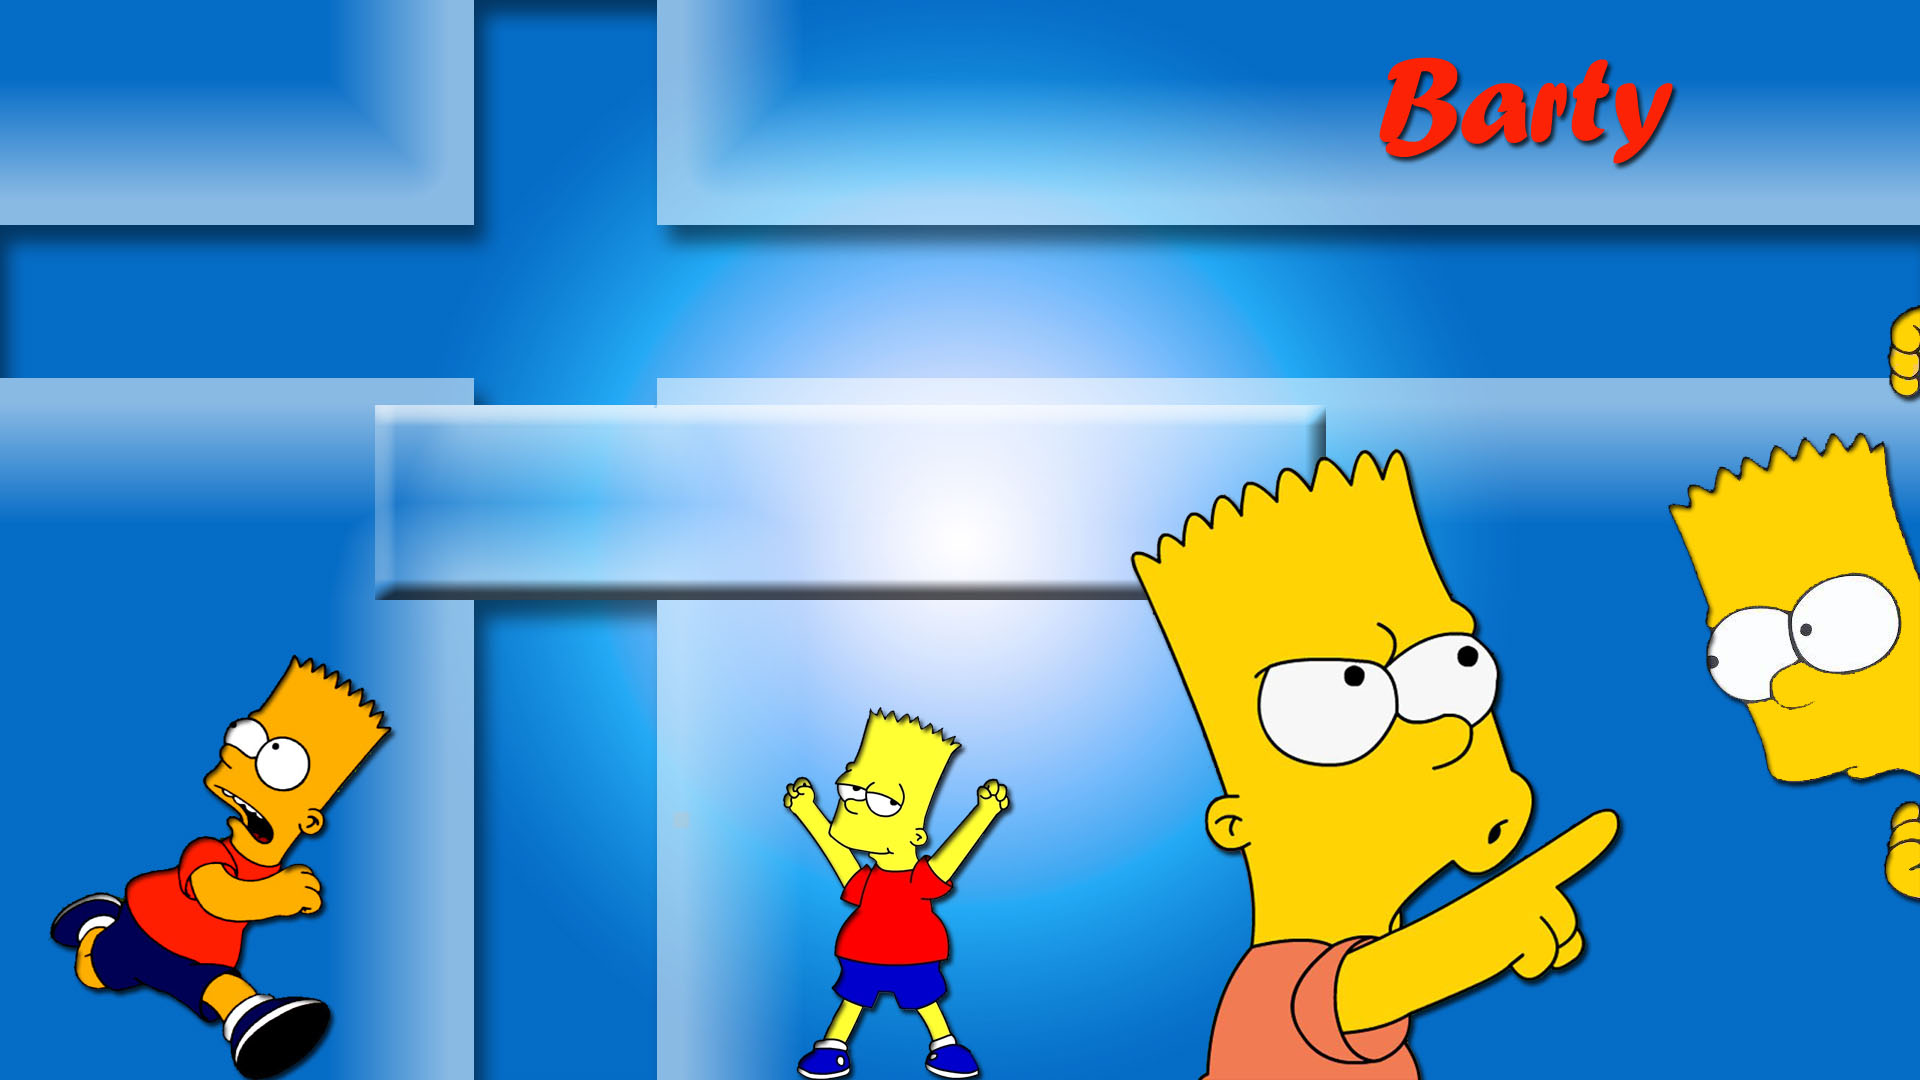 The Bart Simpson Wallpaper – Daily Backgrounds in HD